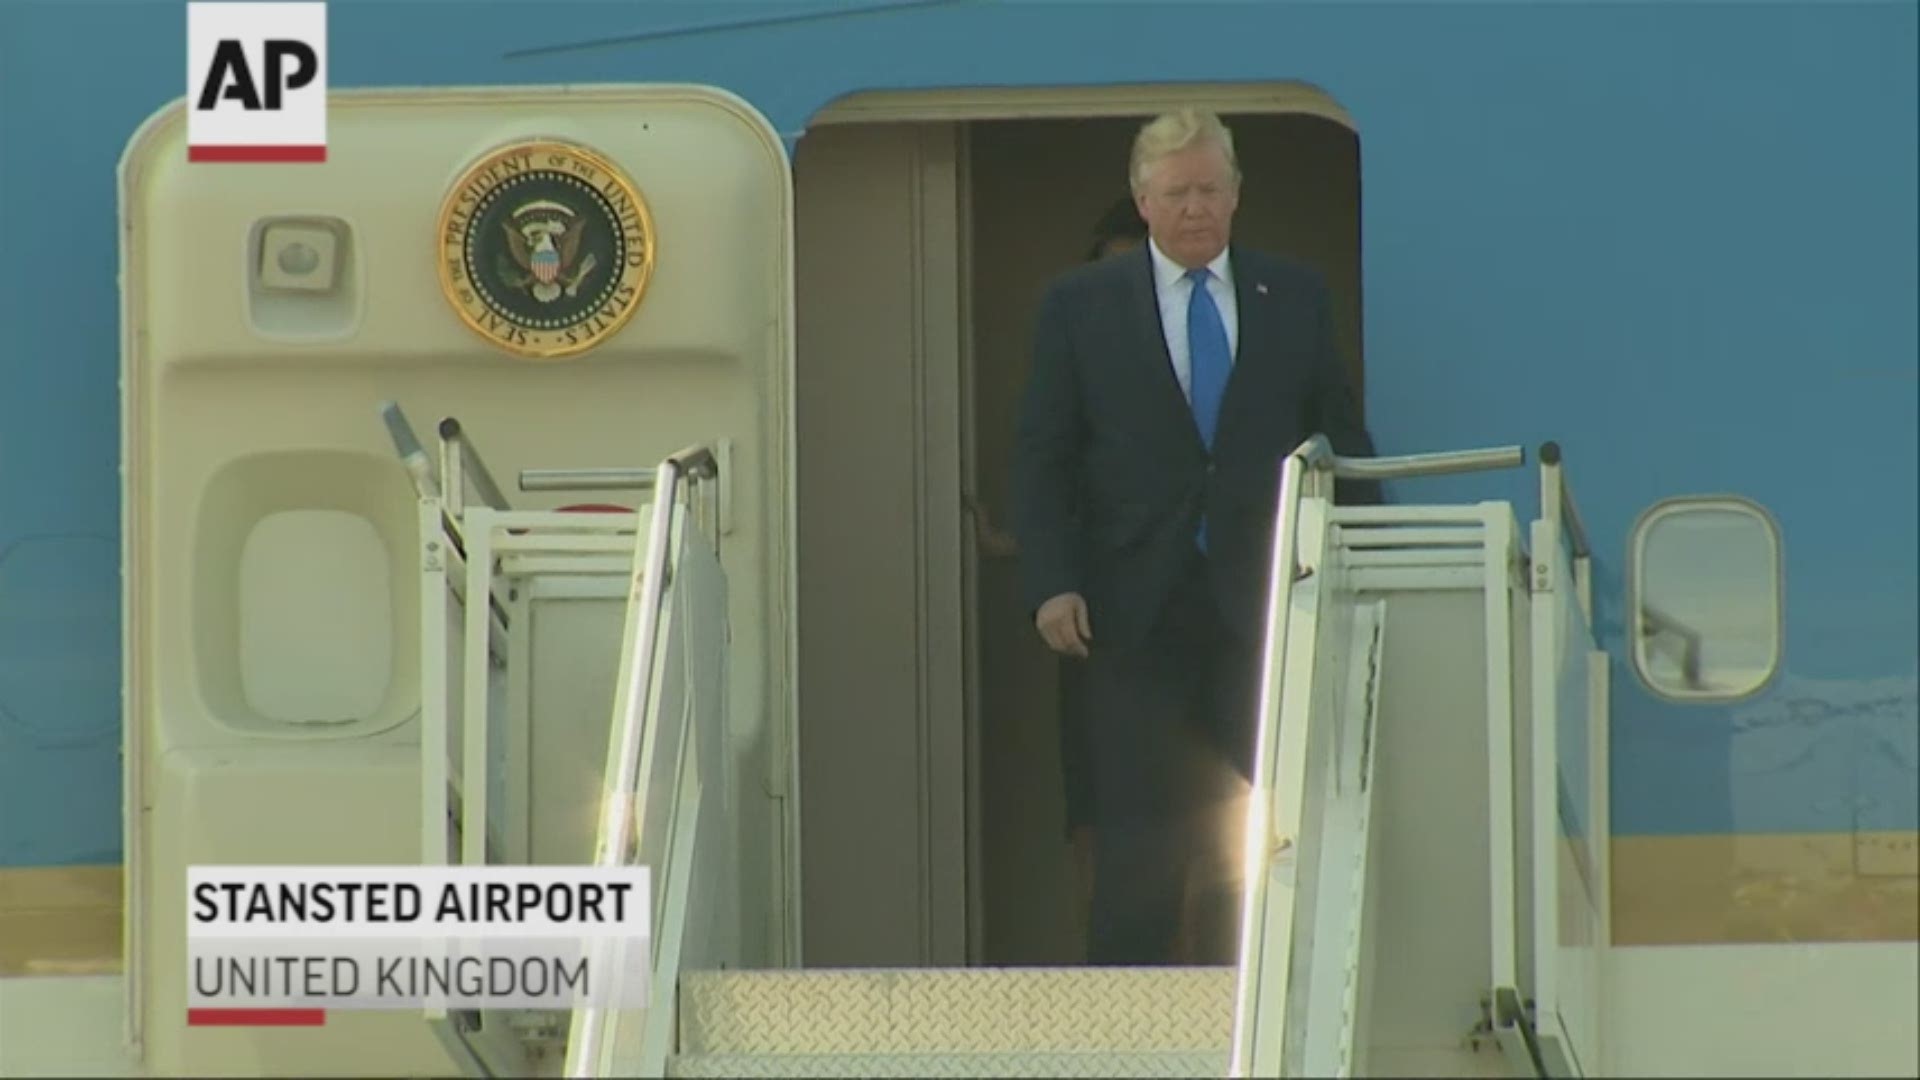 President Donald Trump has arrived in the U.K. on the first leg of a trip that will include commemorating the 75th anniversary of D-Day. (AP)